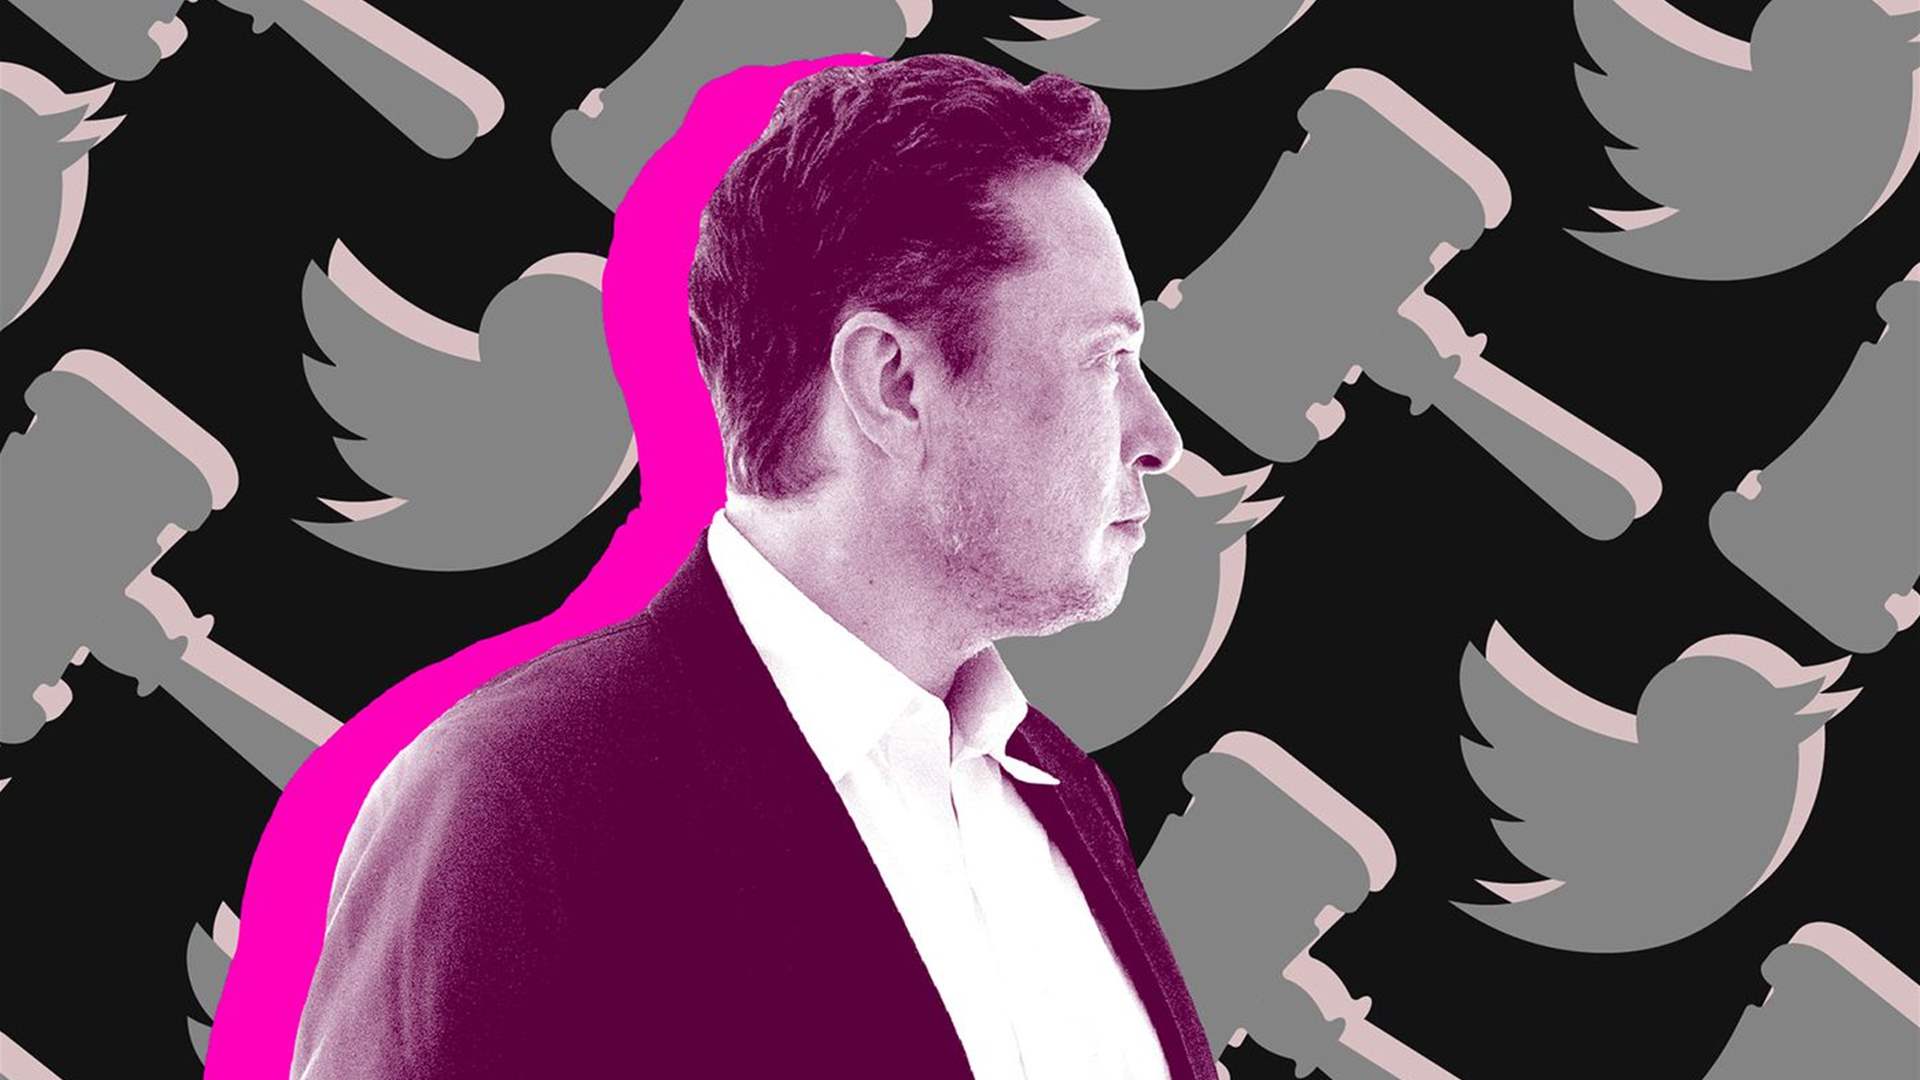 Elon Musk is being sued for defamation after falsely claiming a man was a neo-Nazi on X